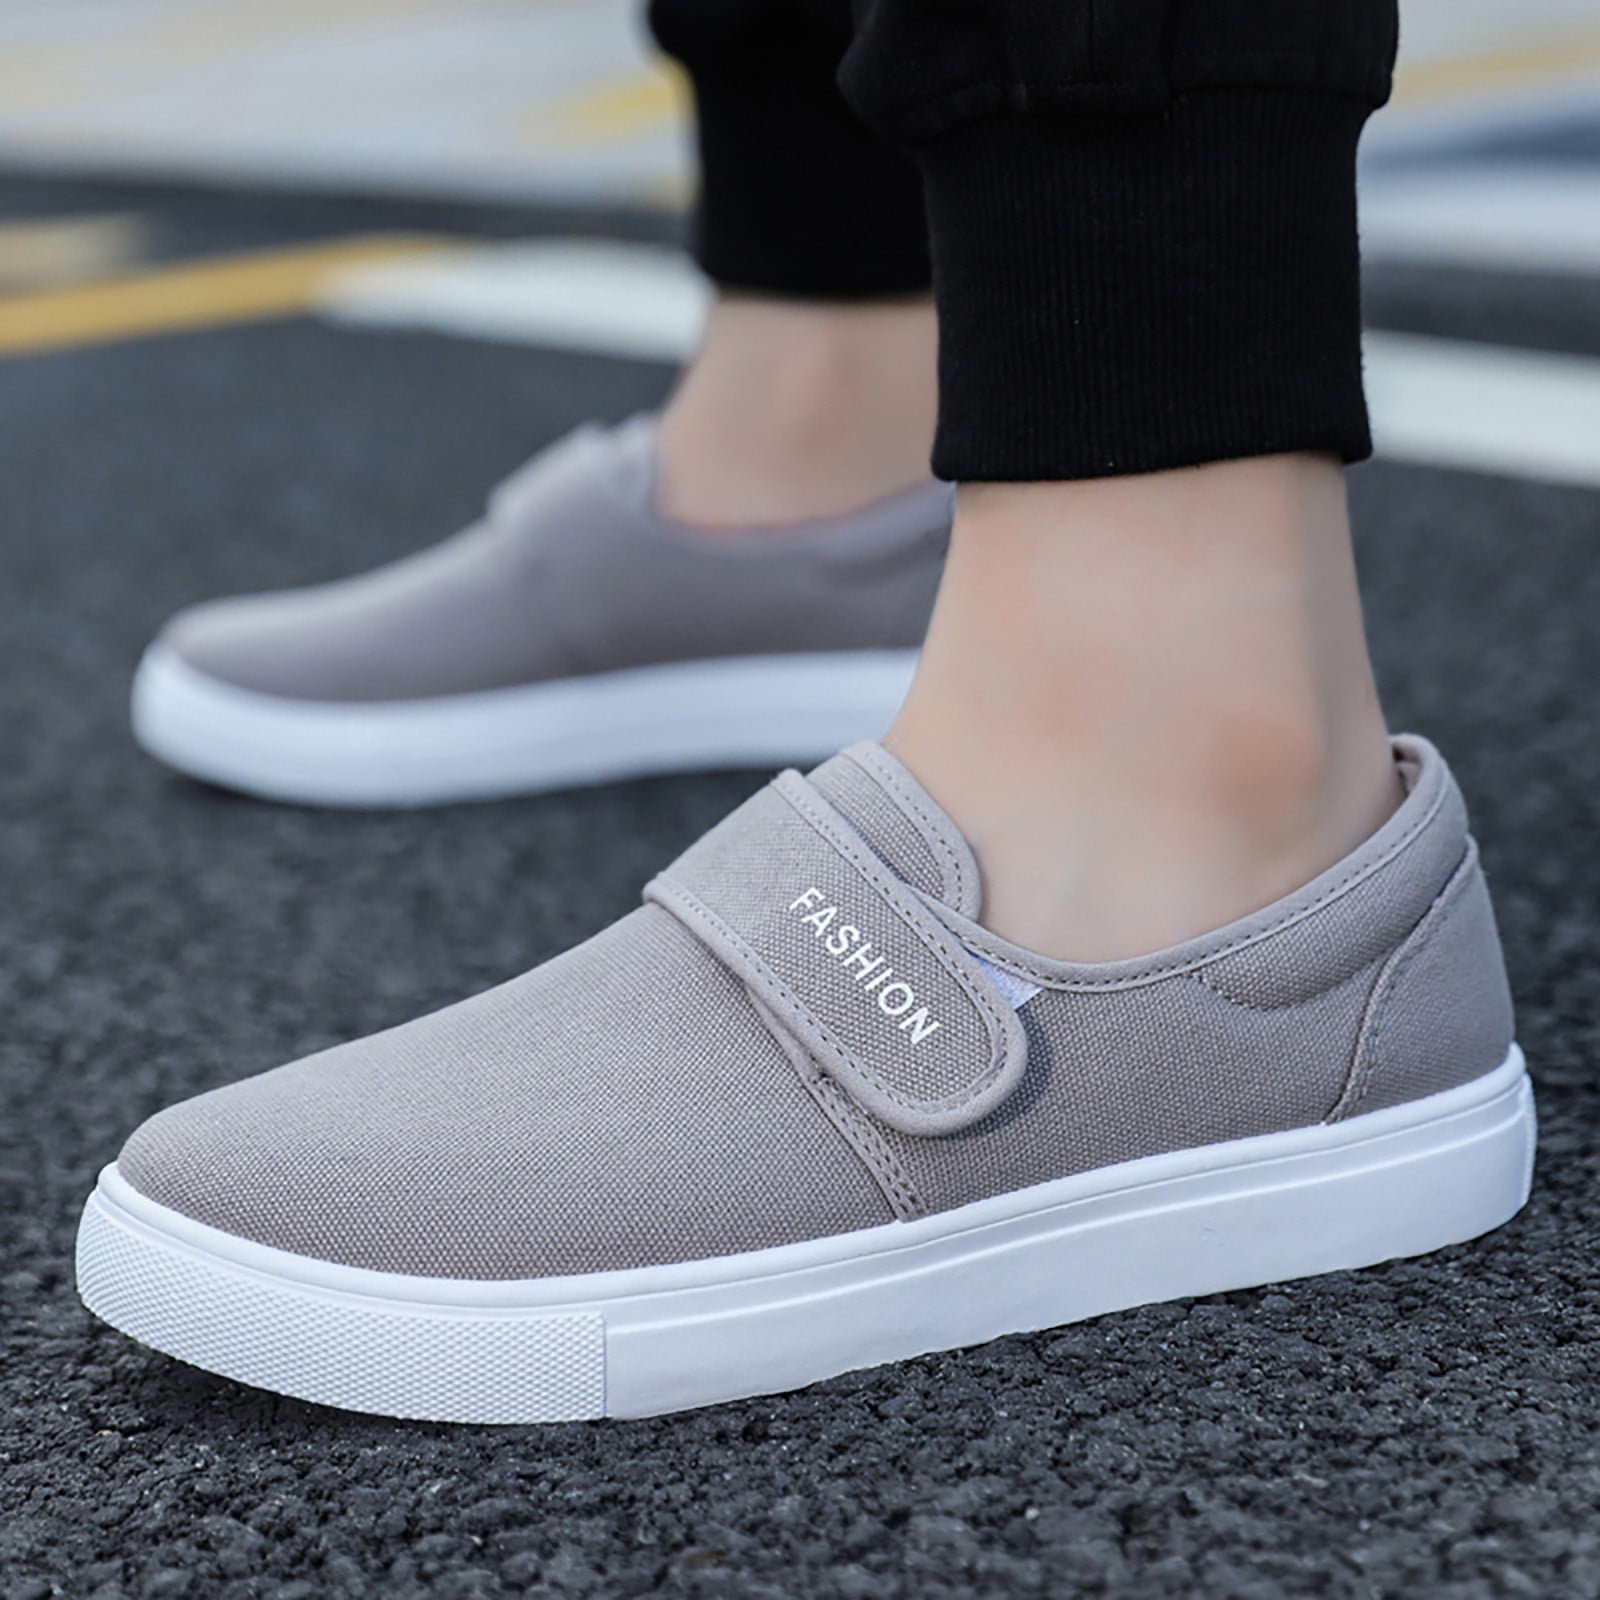 5 Sleek Business Casual Sneakers Perfect for the Office - Hockerty